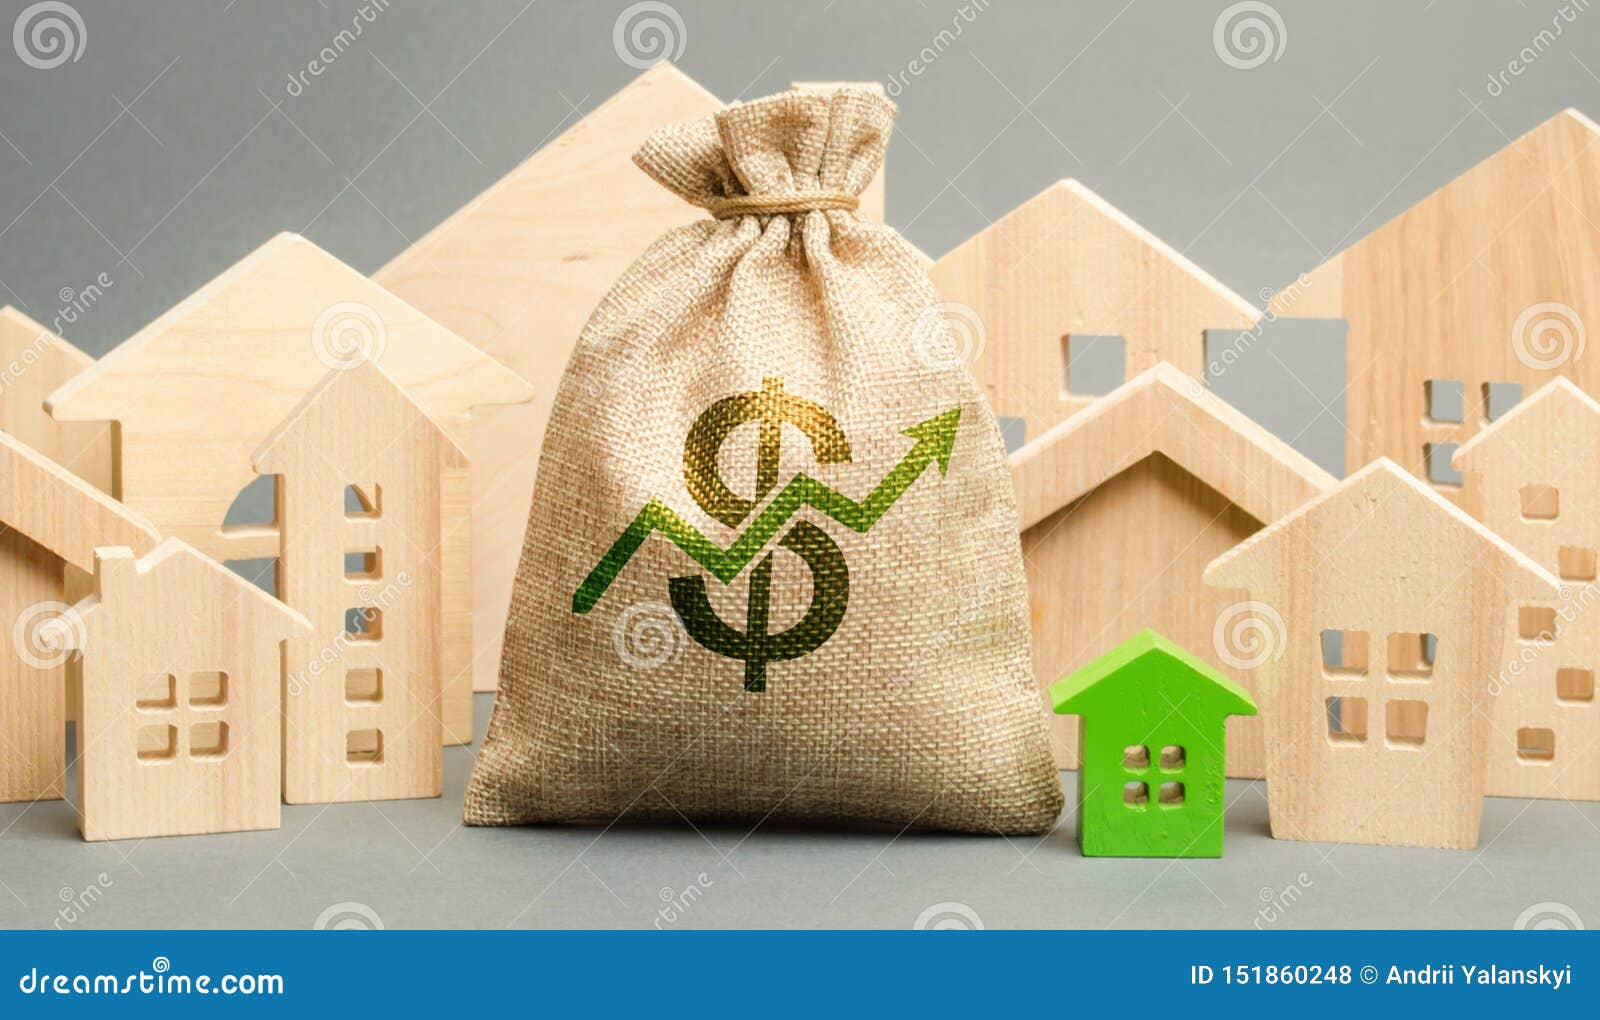 money bag with arrow up and miniature wooden houses. the concept of rising property prices. high mortgage rates. expensive rental